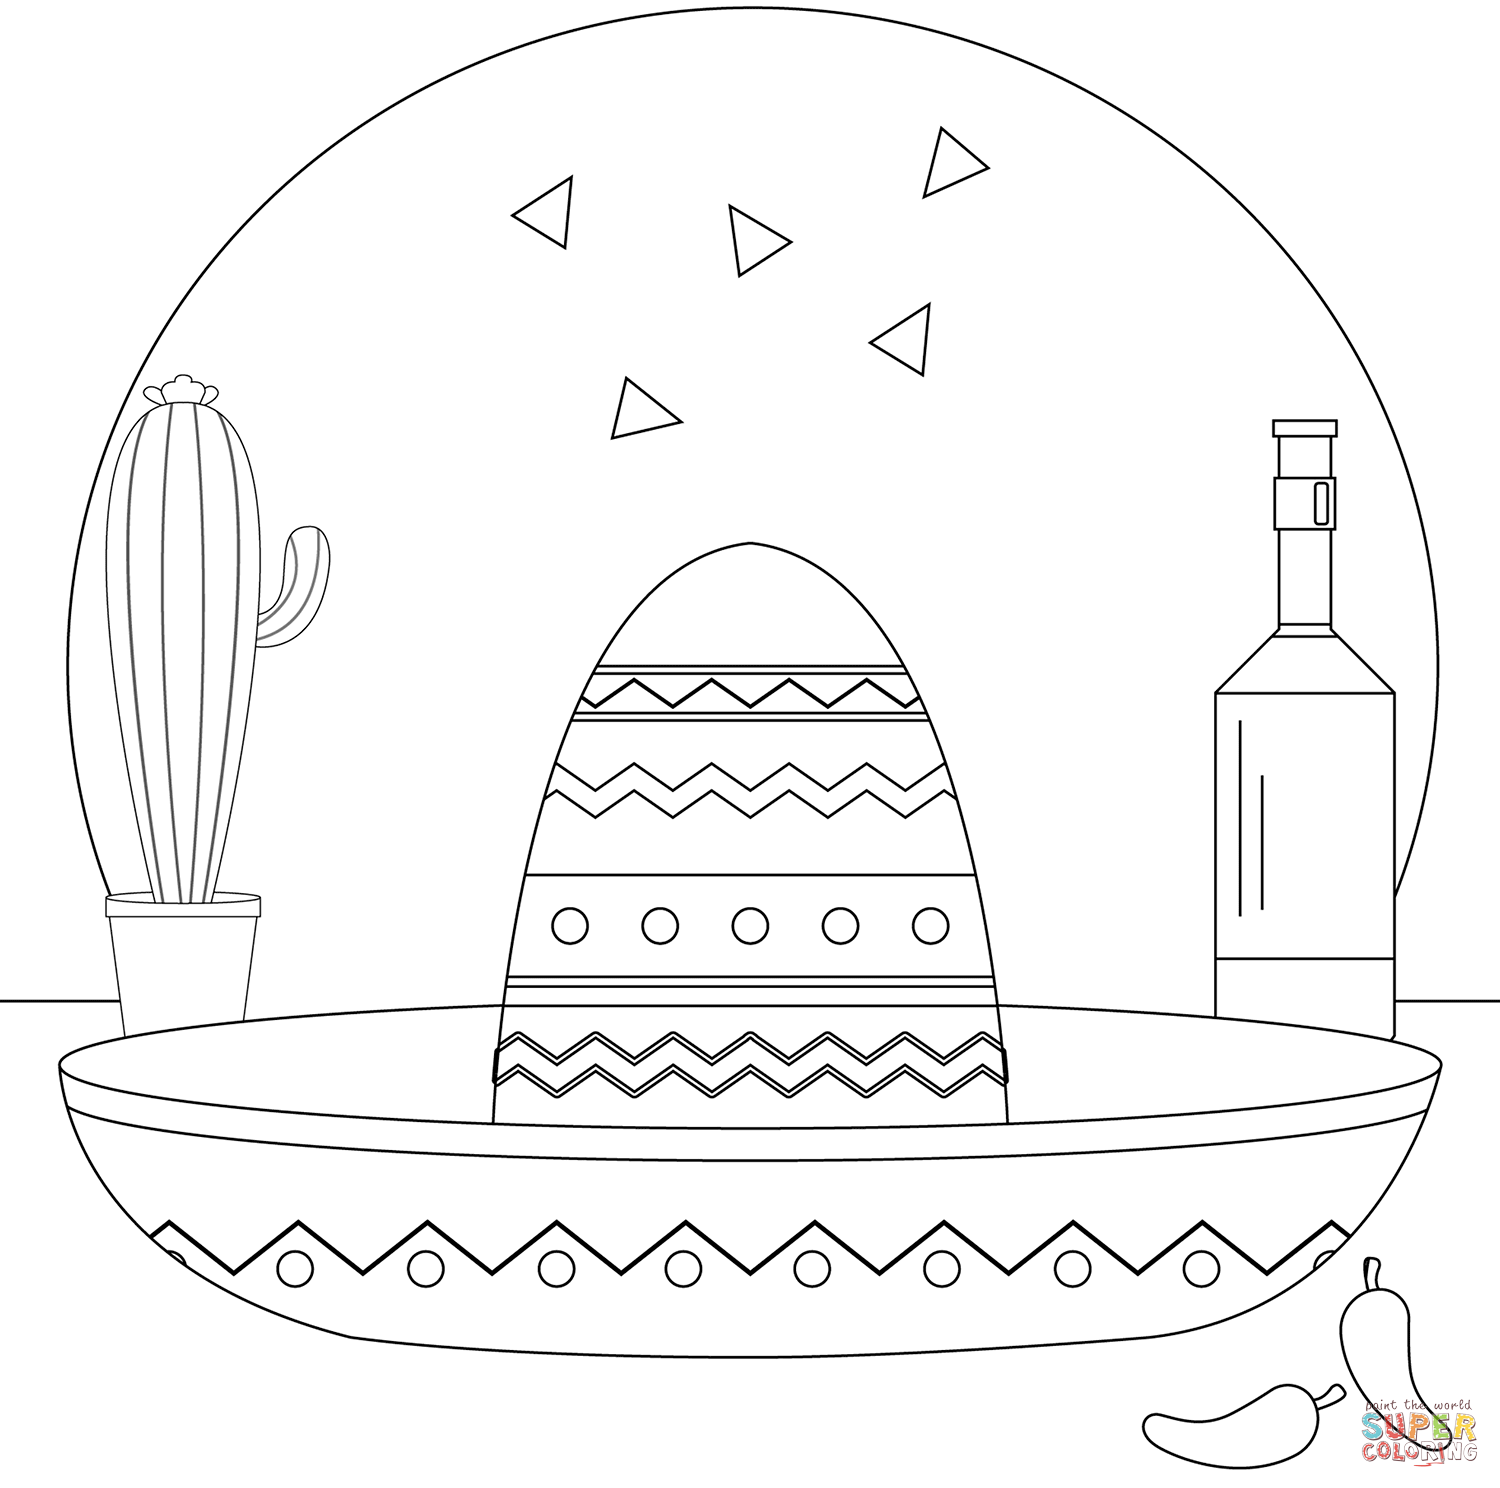 Sombrero coloring page free printable coloring pages